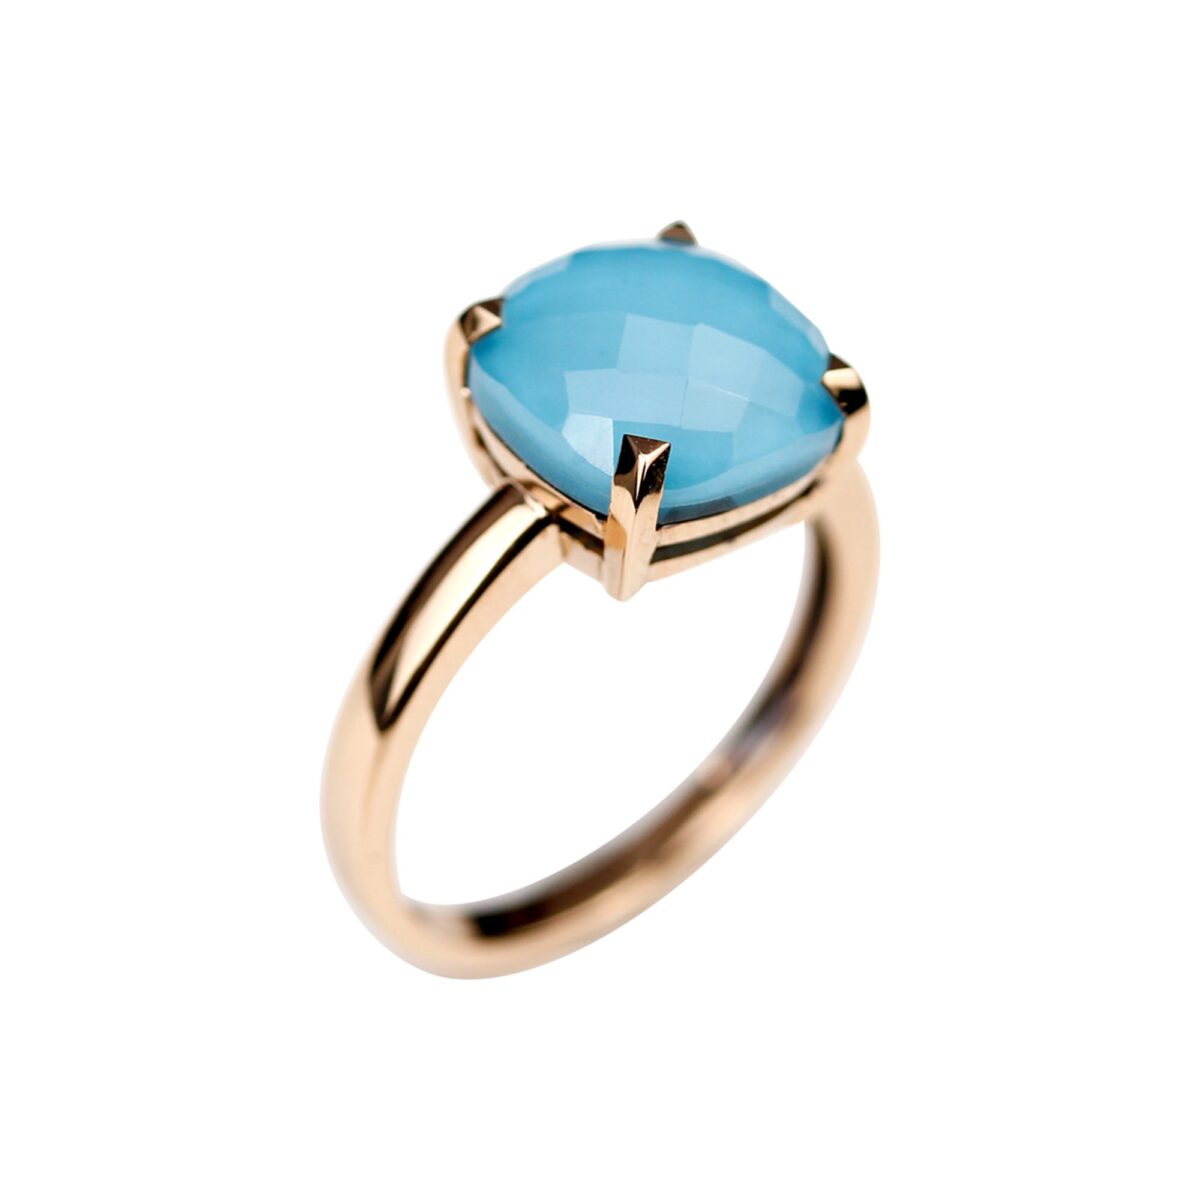 Bague turquoise & or rose